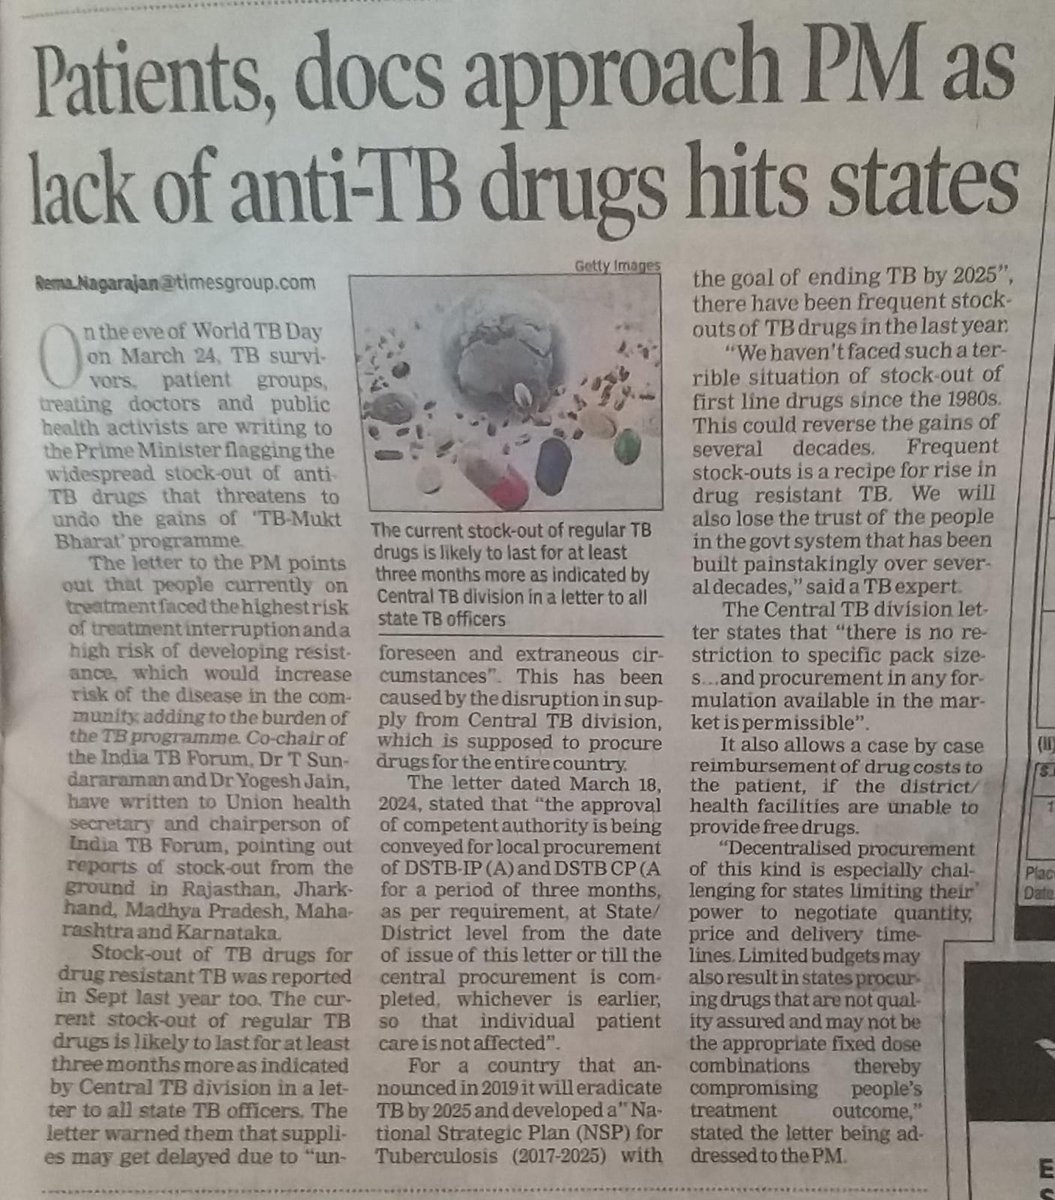 '...treatment interruptions on such a scale will compromise the outcomes of individual patients and the programme, as also worsen the drug resistance situation. It will undermine trust of our private health care partners and will weaken active search for missing cases.'